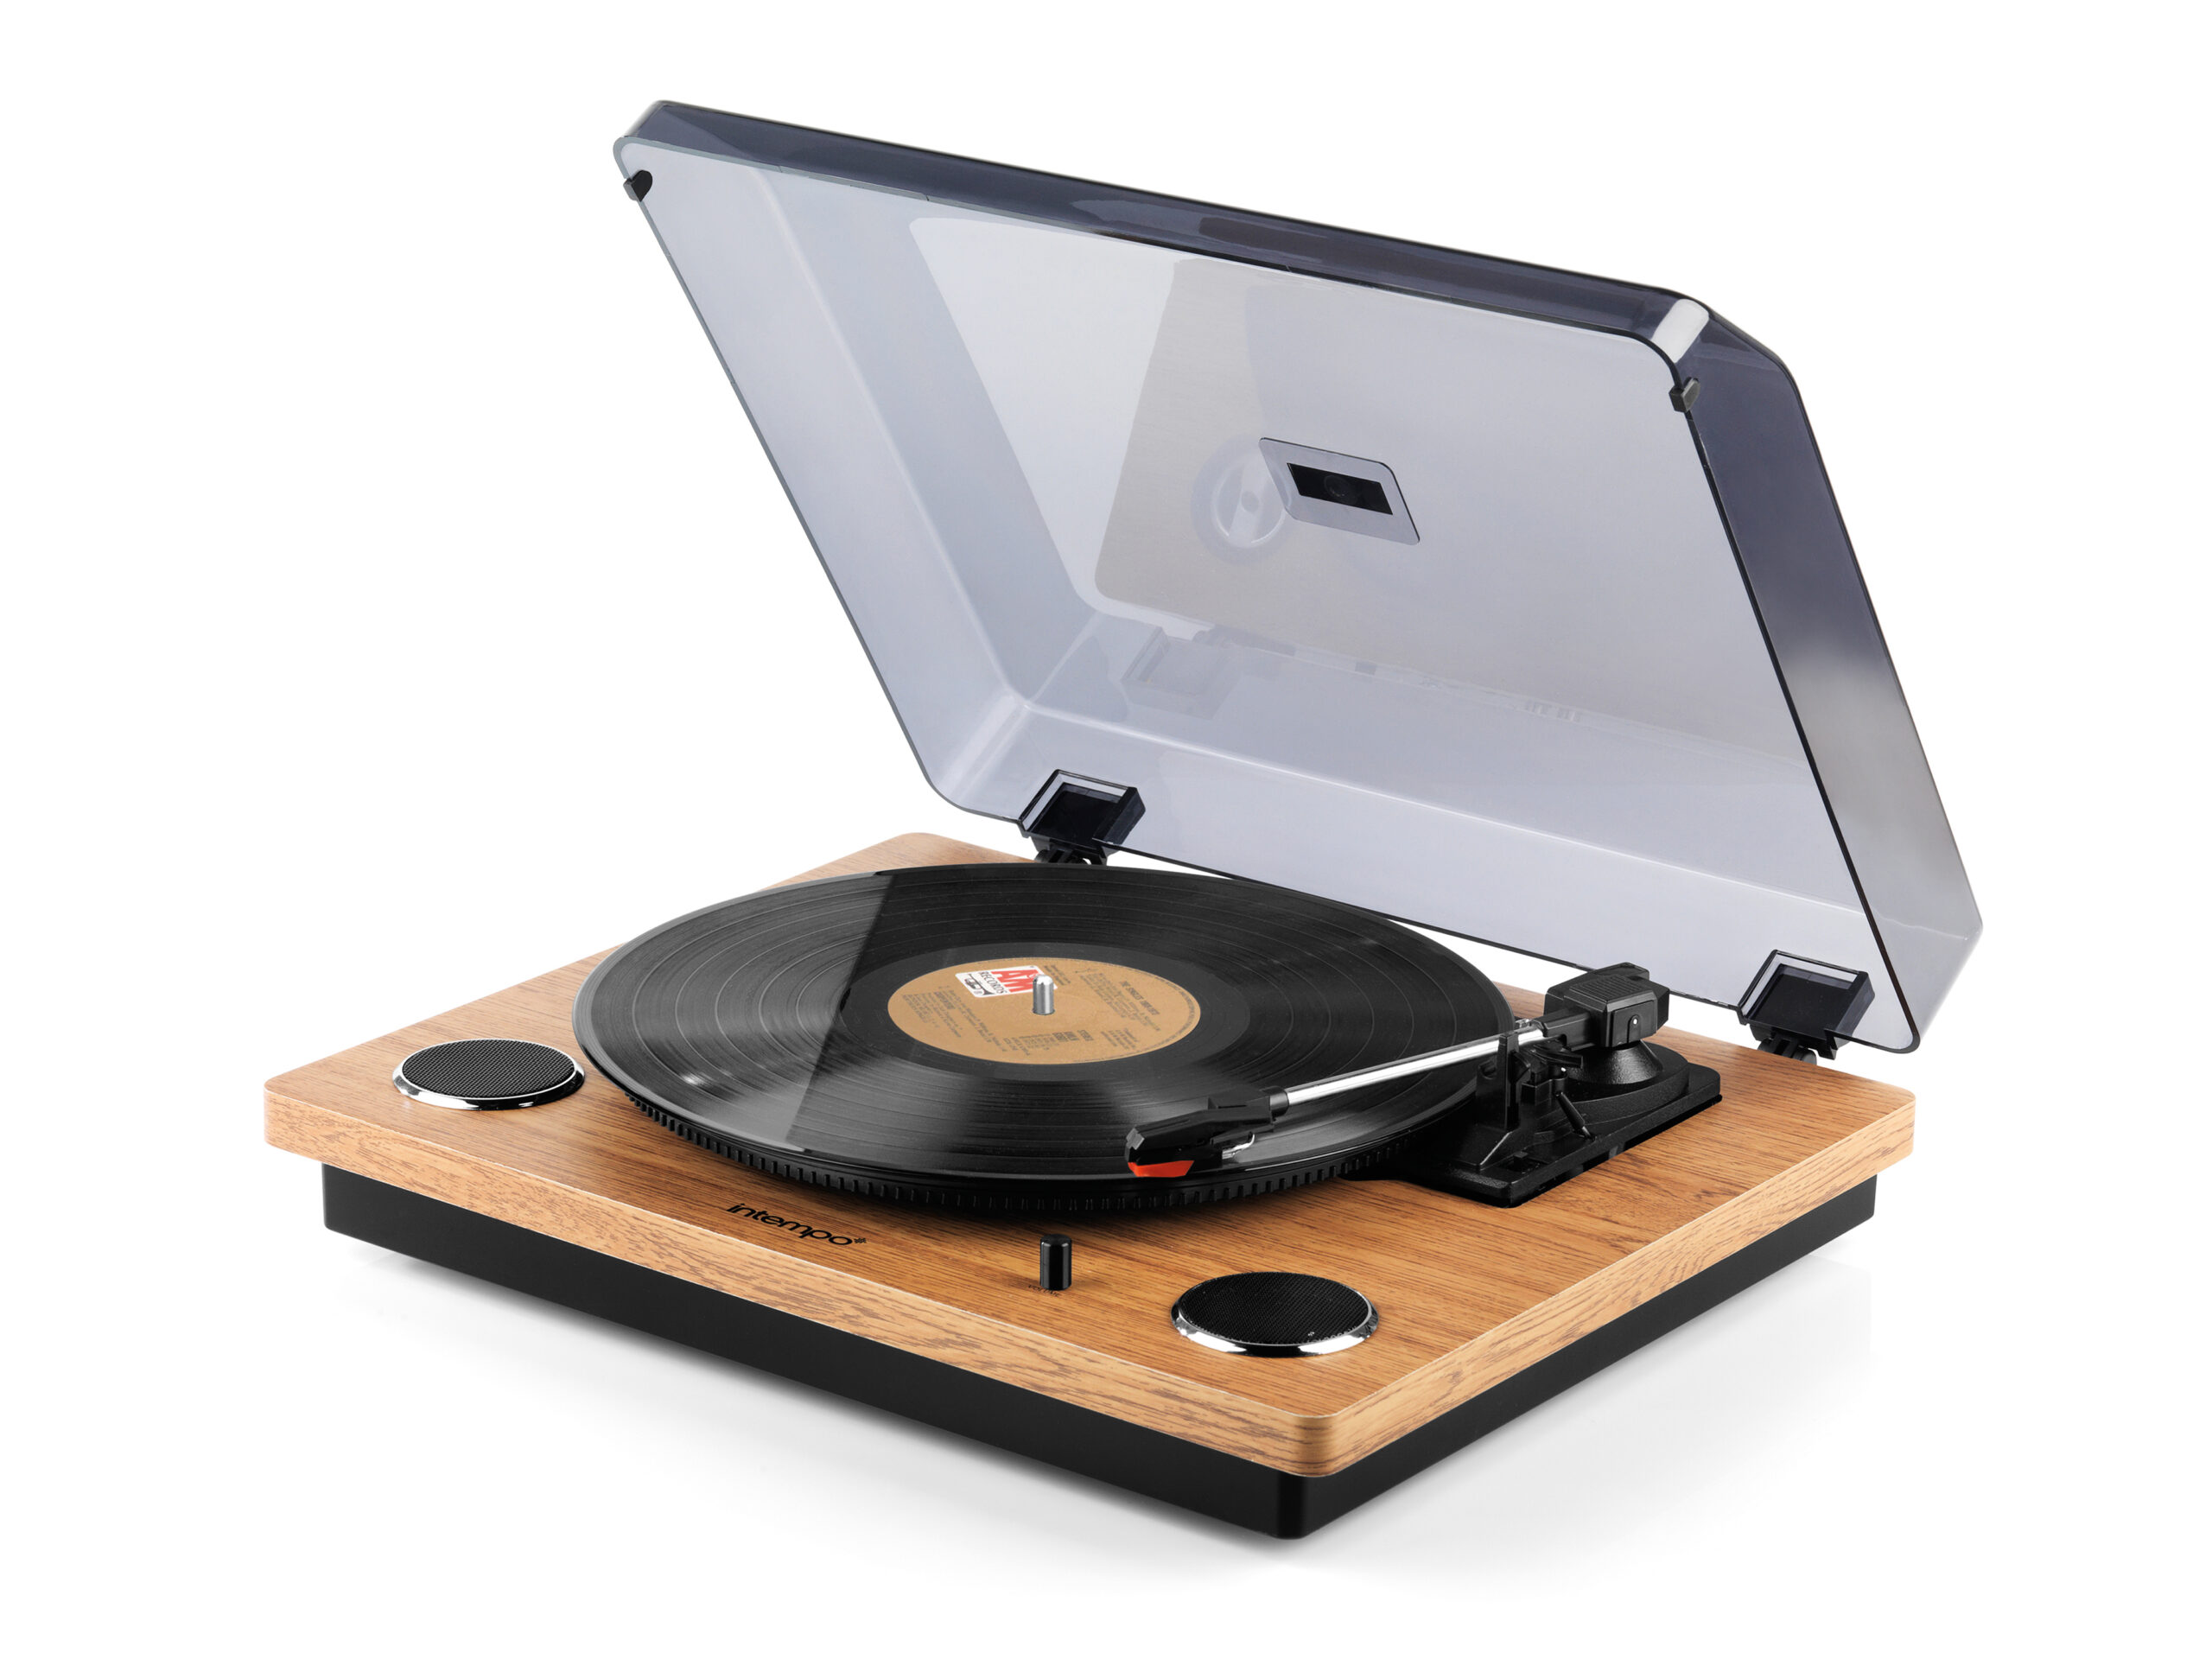 Do new turntables play old records?